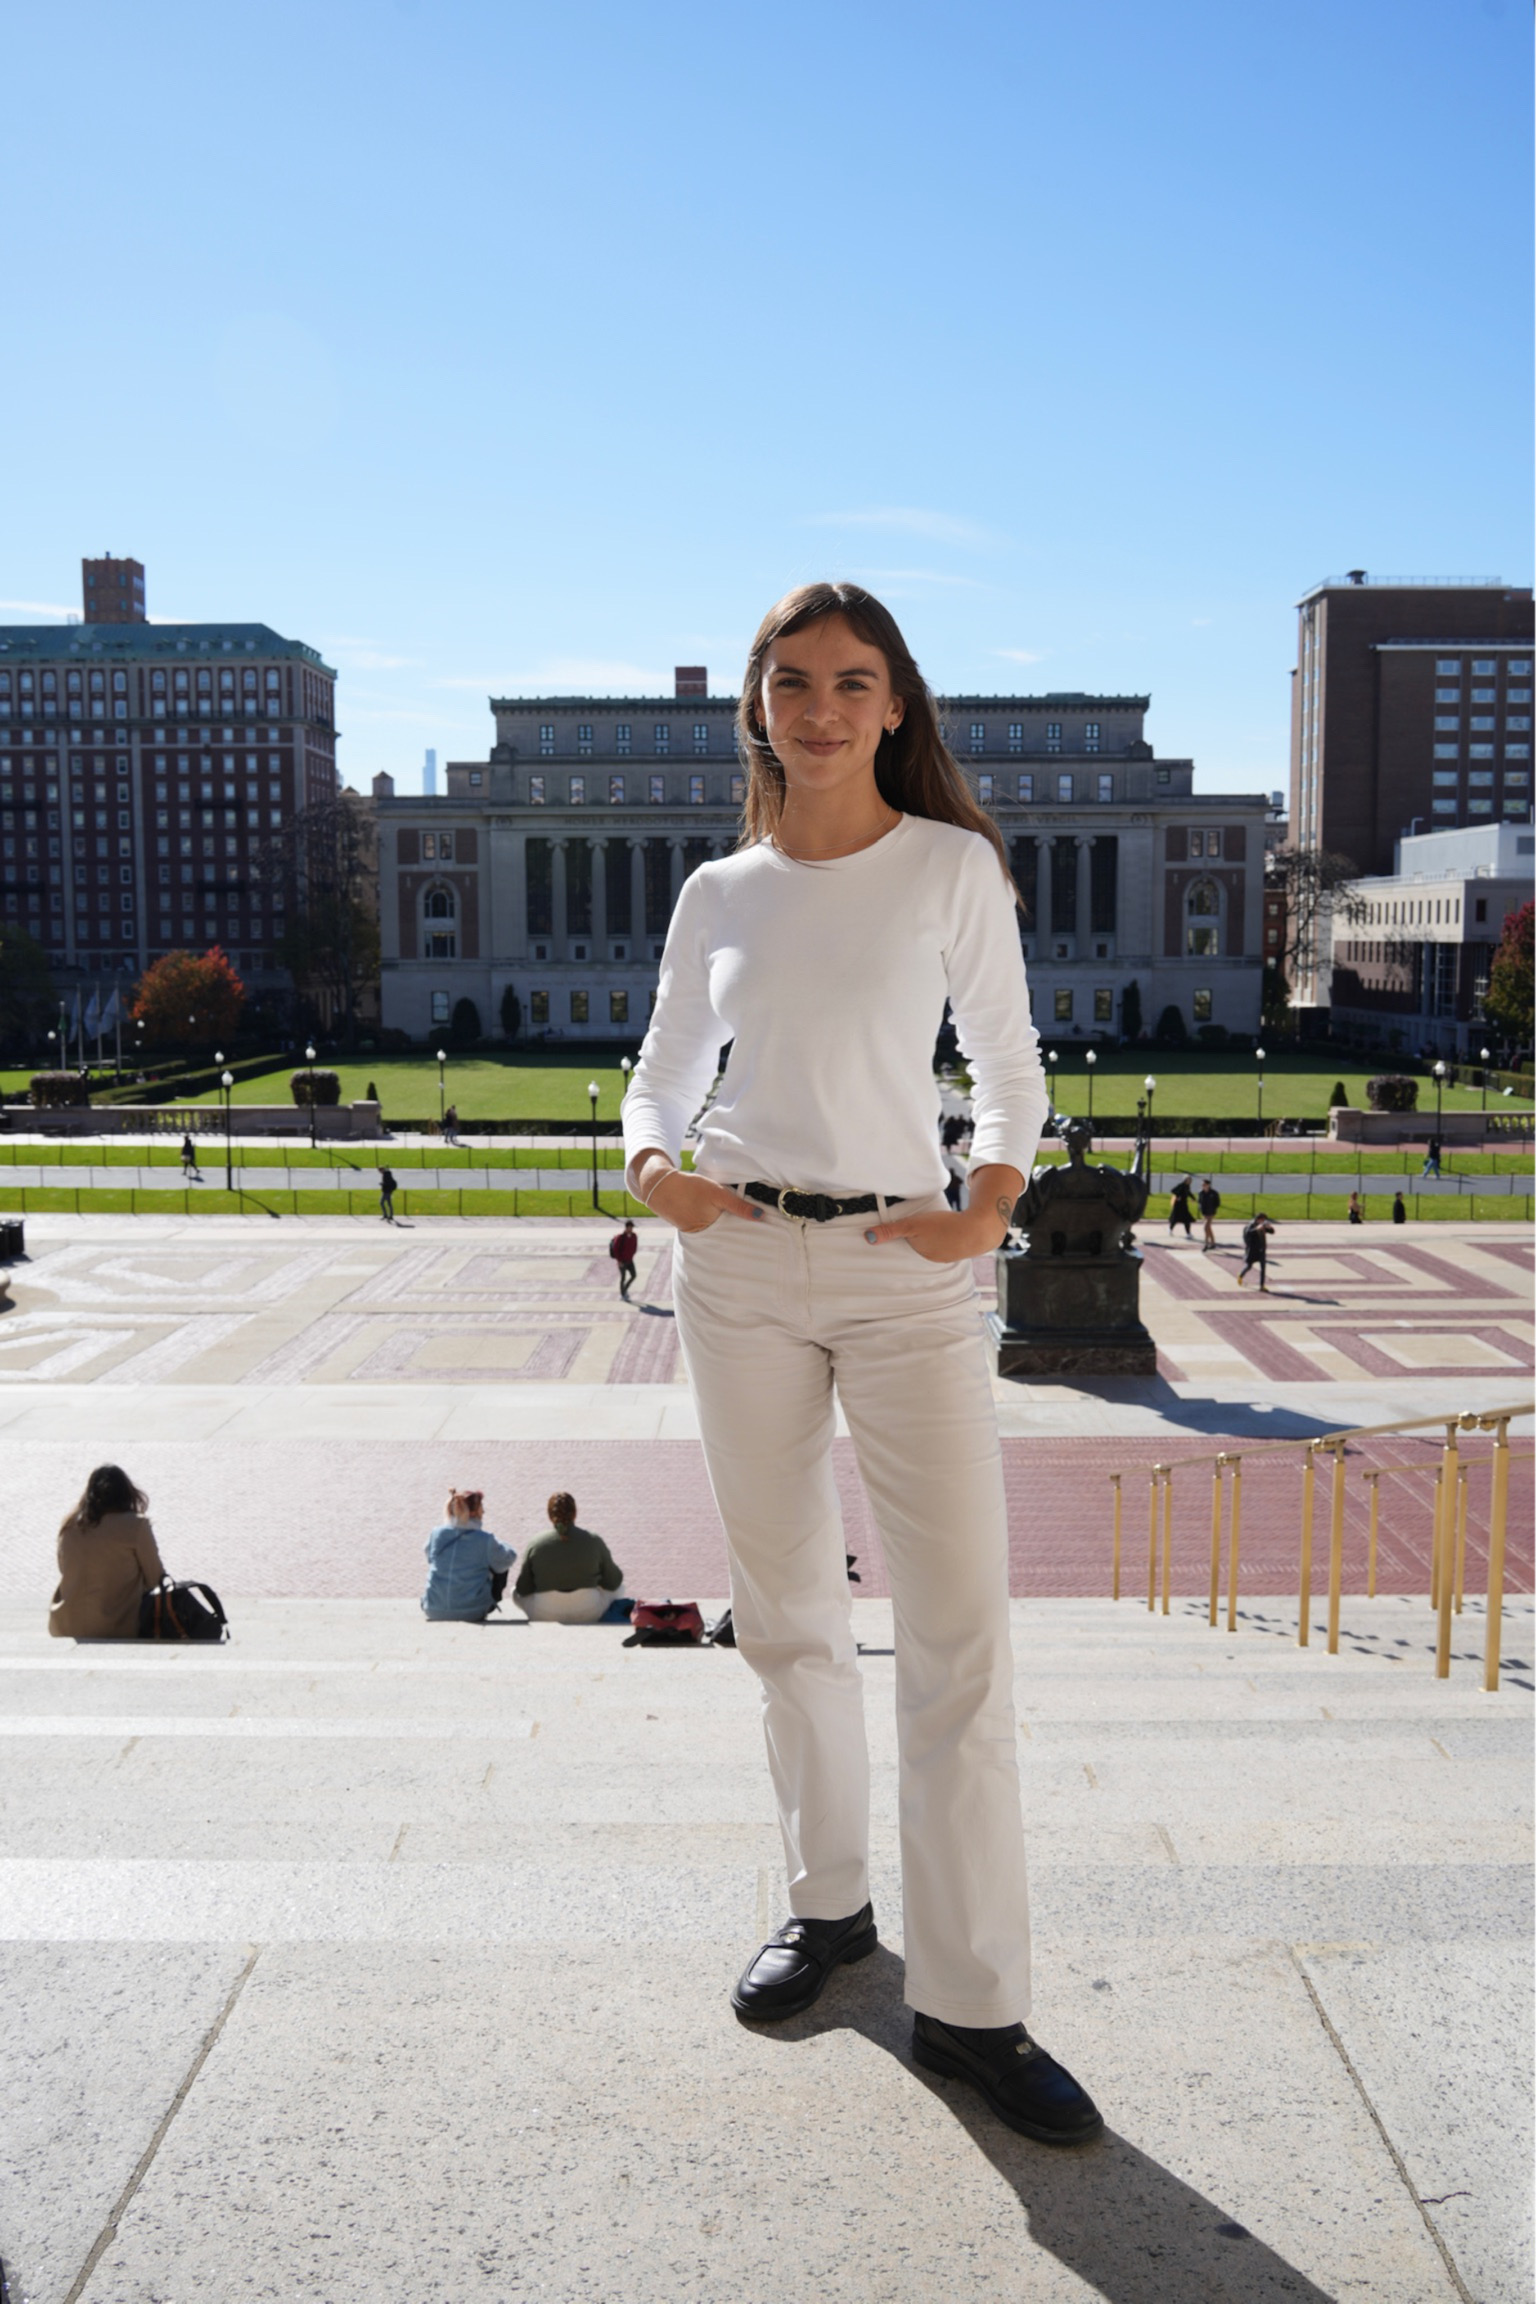 Woman in white stands in front of Columbia campus with buildings in the background